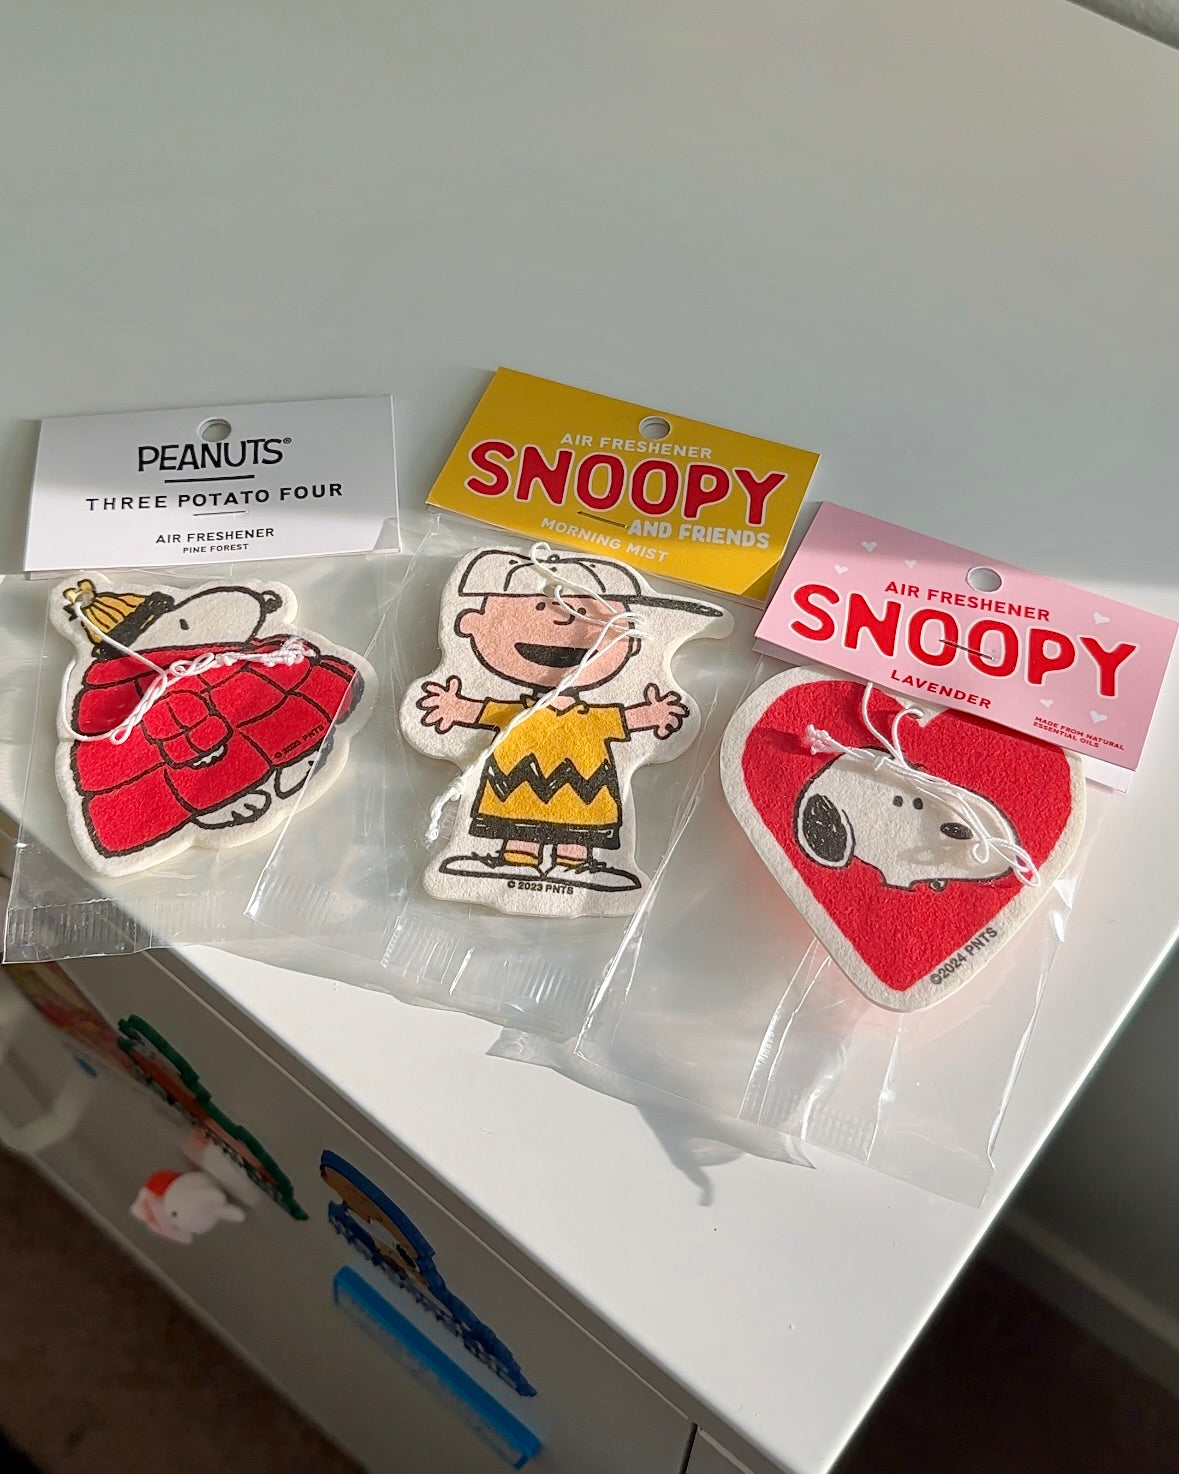 Snoopy Air Freshener ‘Charlie Brown’ - Morning Mist Scent